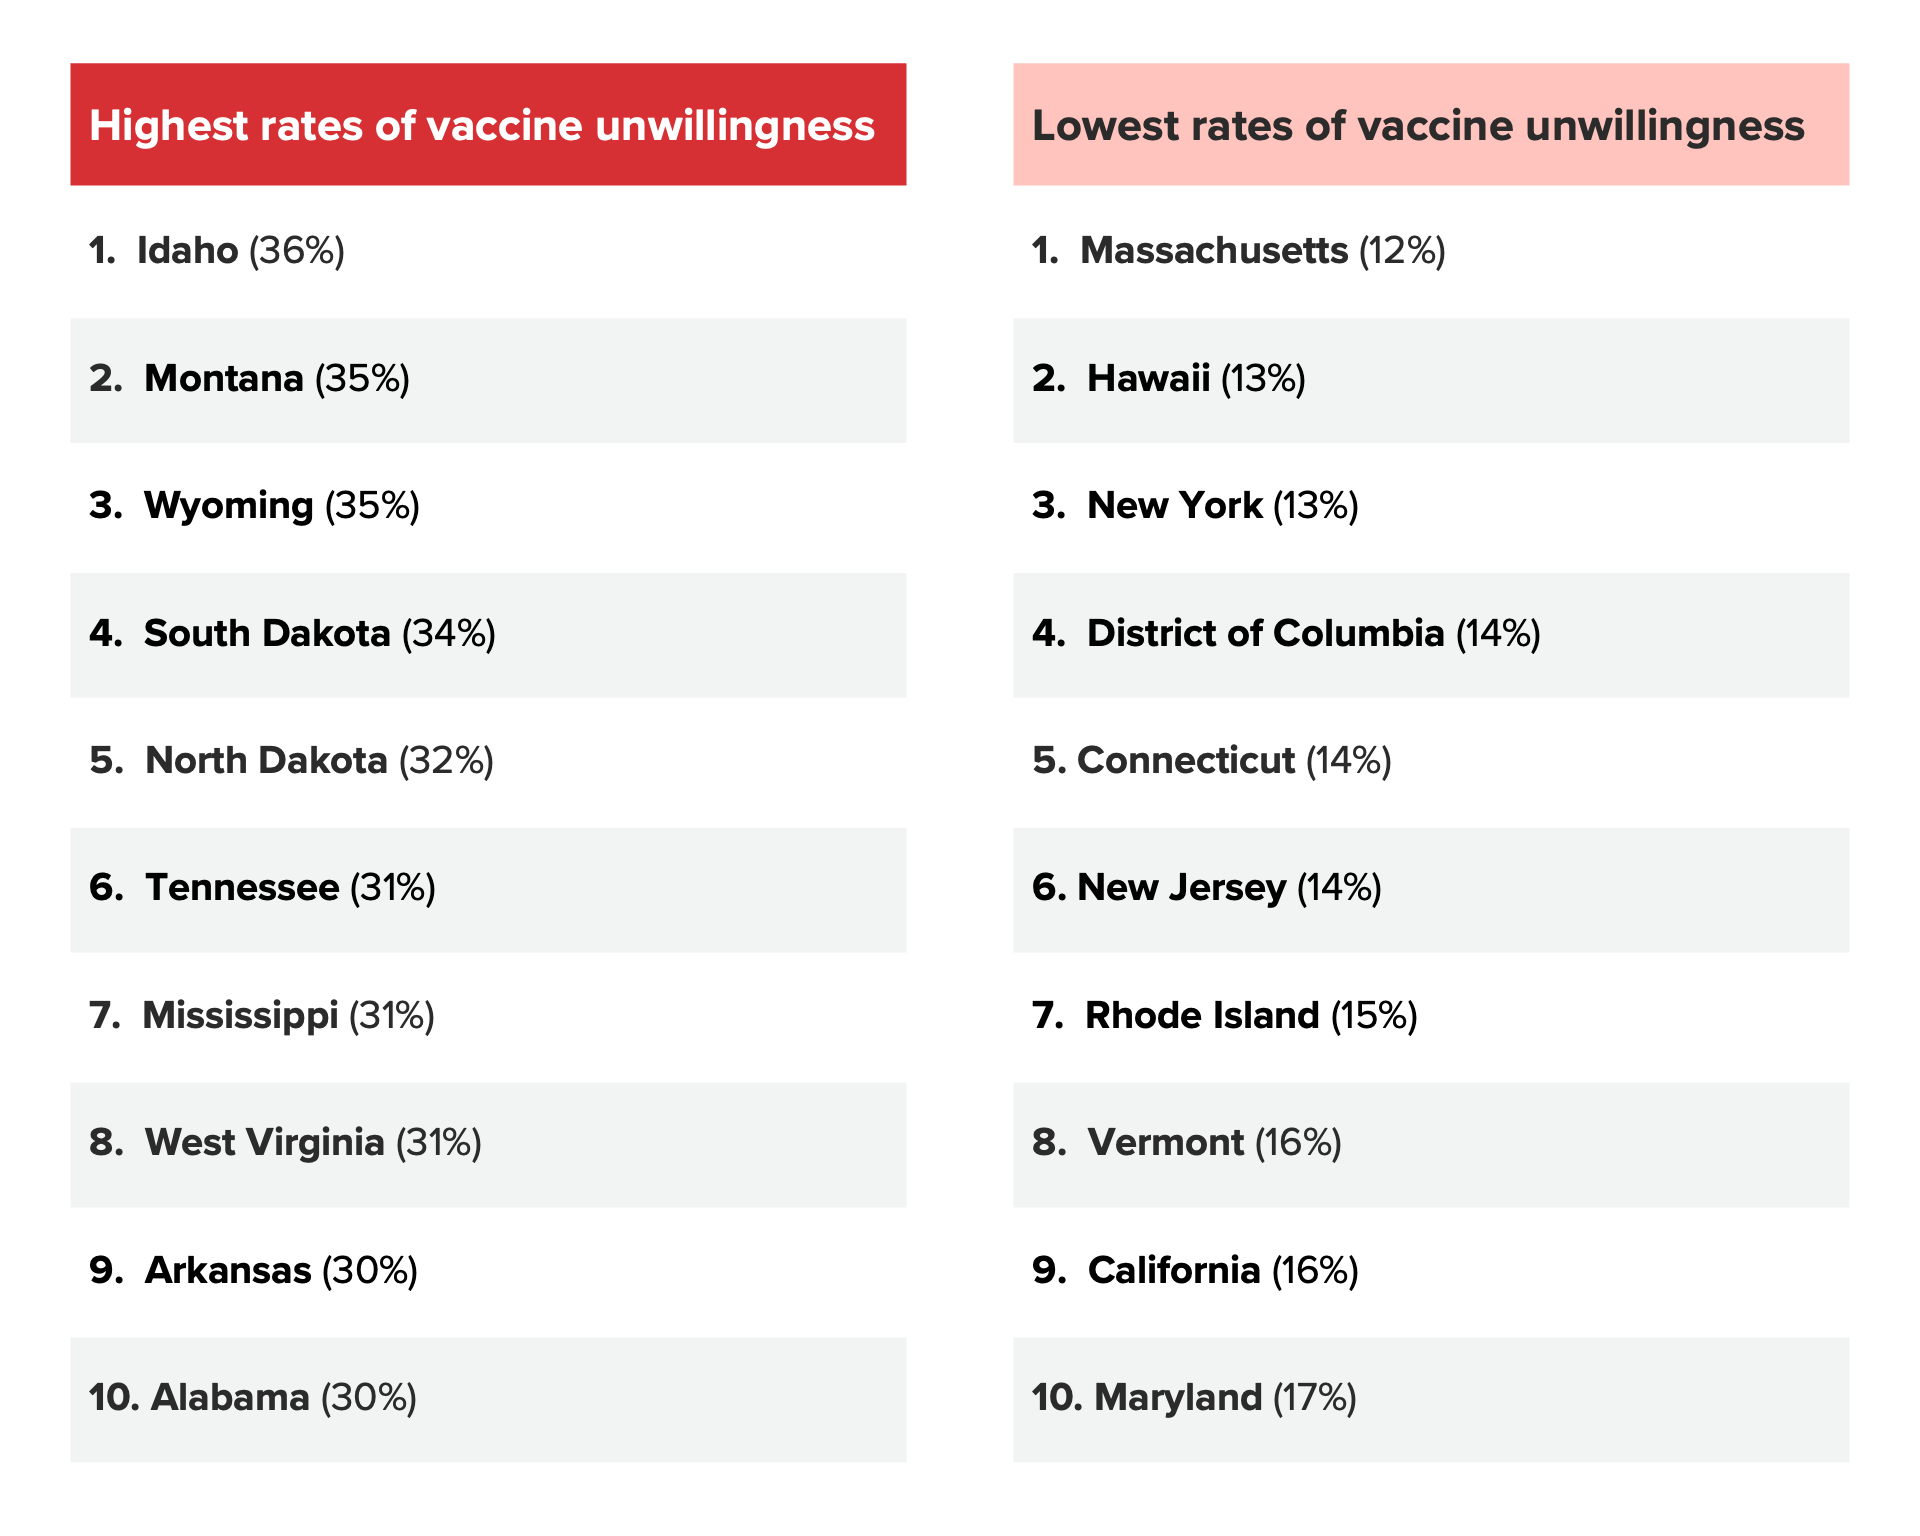 Table conveying the states with the highest and lowest rates of vaccine unwillingness